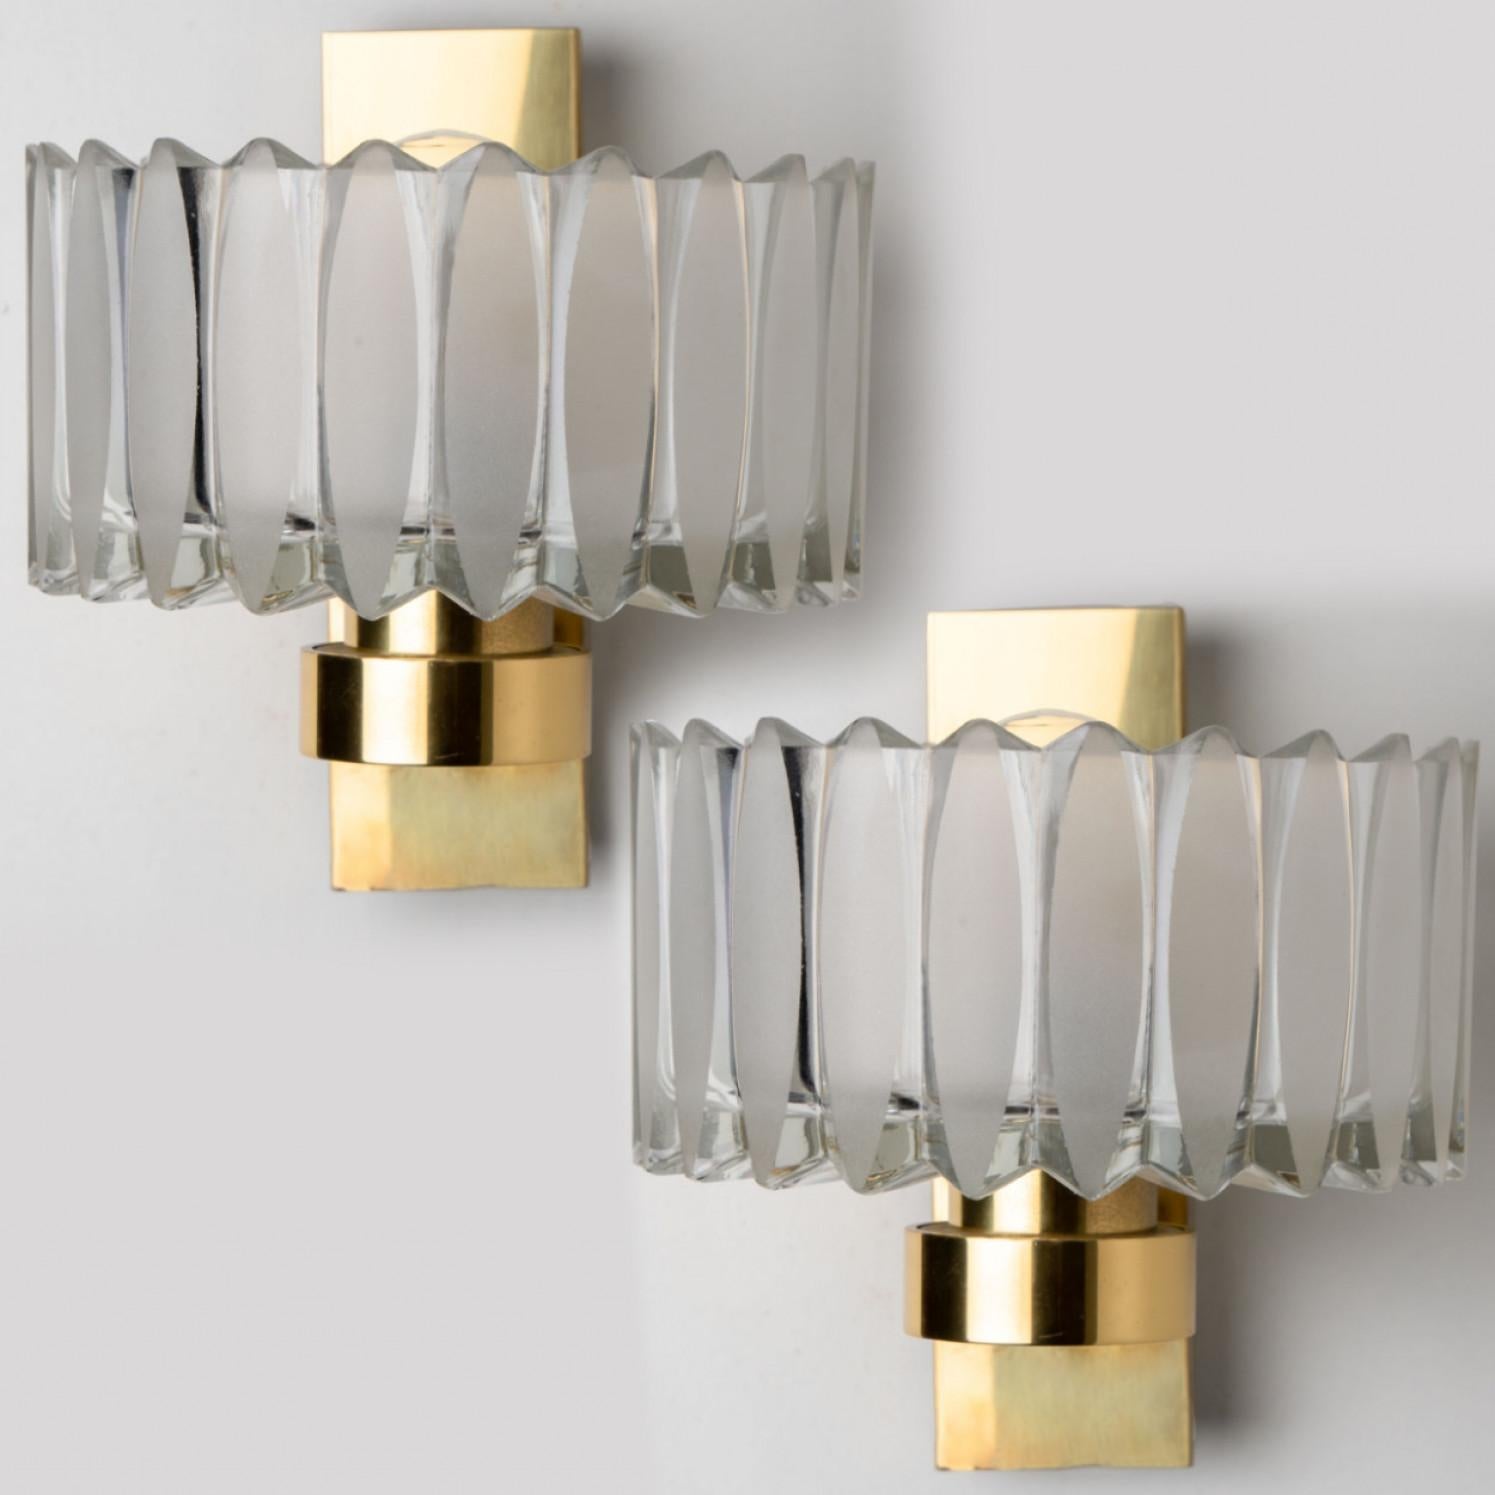 Pair of Hillebrand Brass and Glass Wall Light Fixtures, 1970s For Sale 1